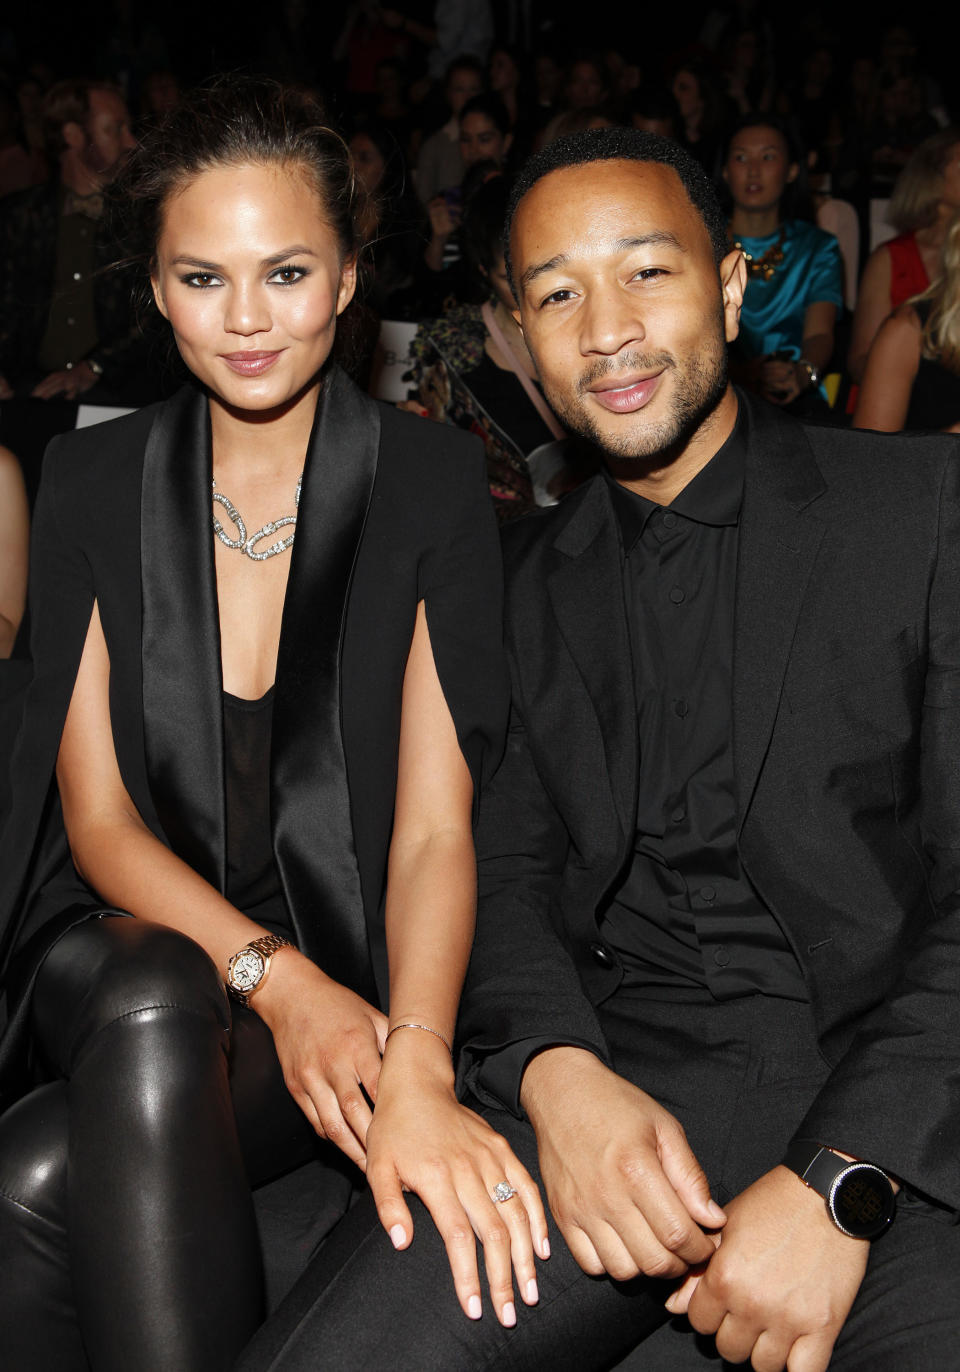 Chrissy Teigen, left, and John Legend attend the Badgley Mischka Spring 2014 collection on Tuesday, Sept. 10, 2013, during Mercedes-Benz Fashion Week in New York. (Photo by Amy Sussman/Invision/AP)